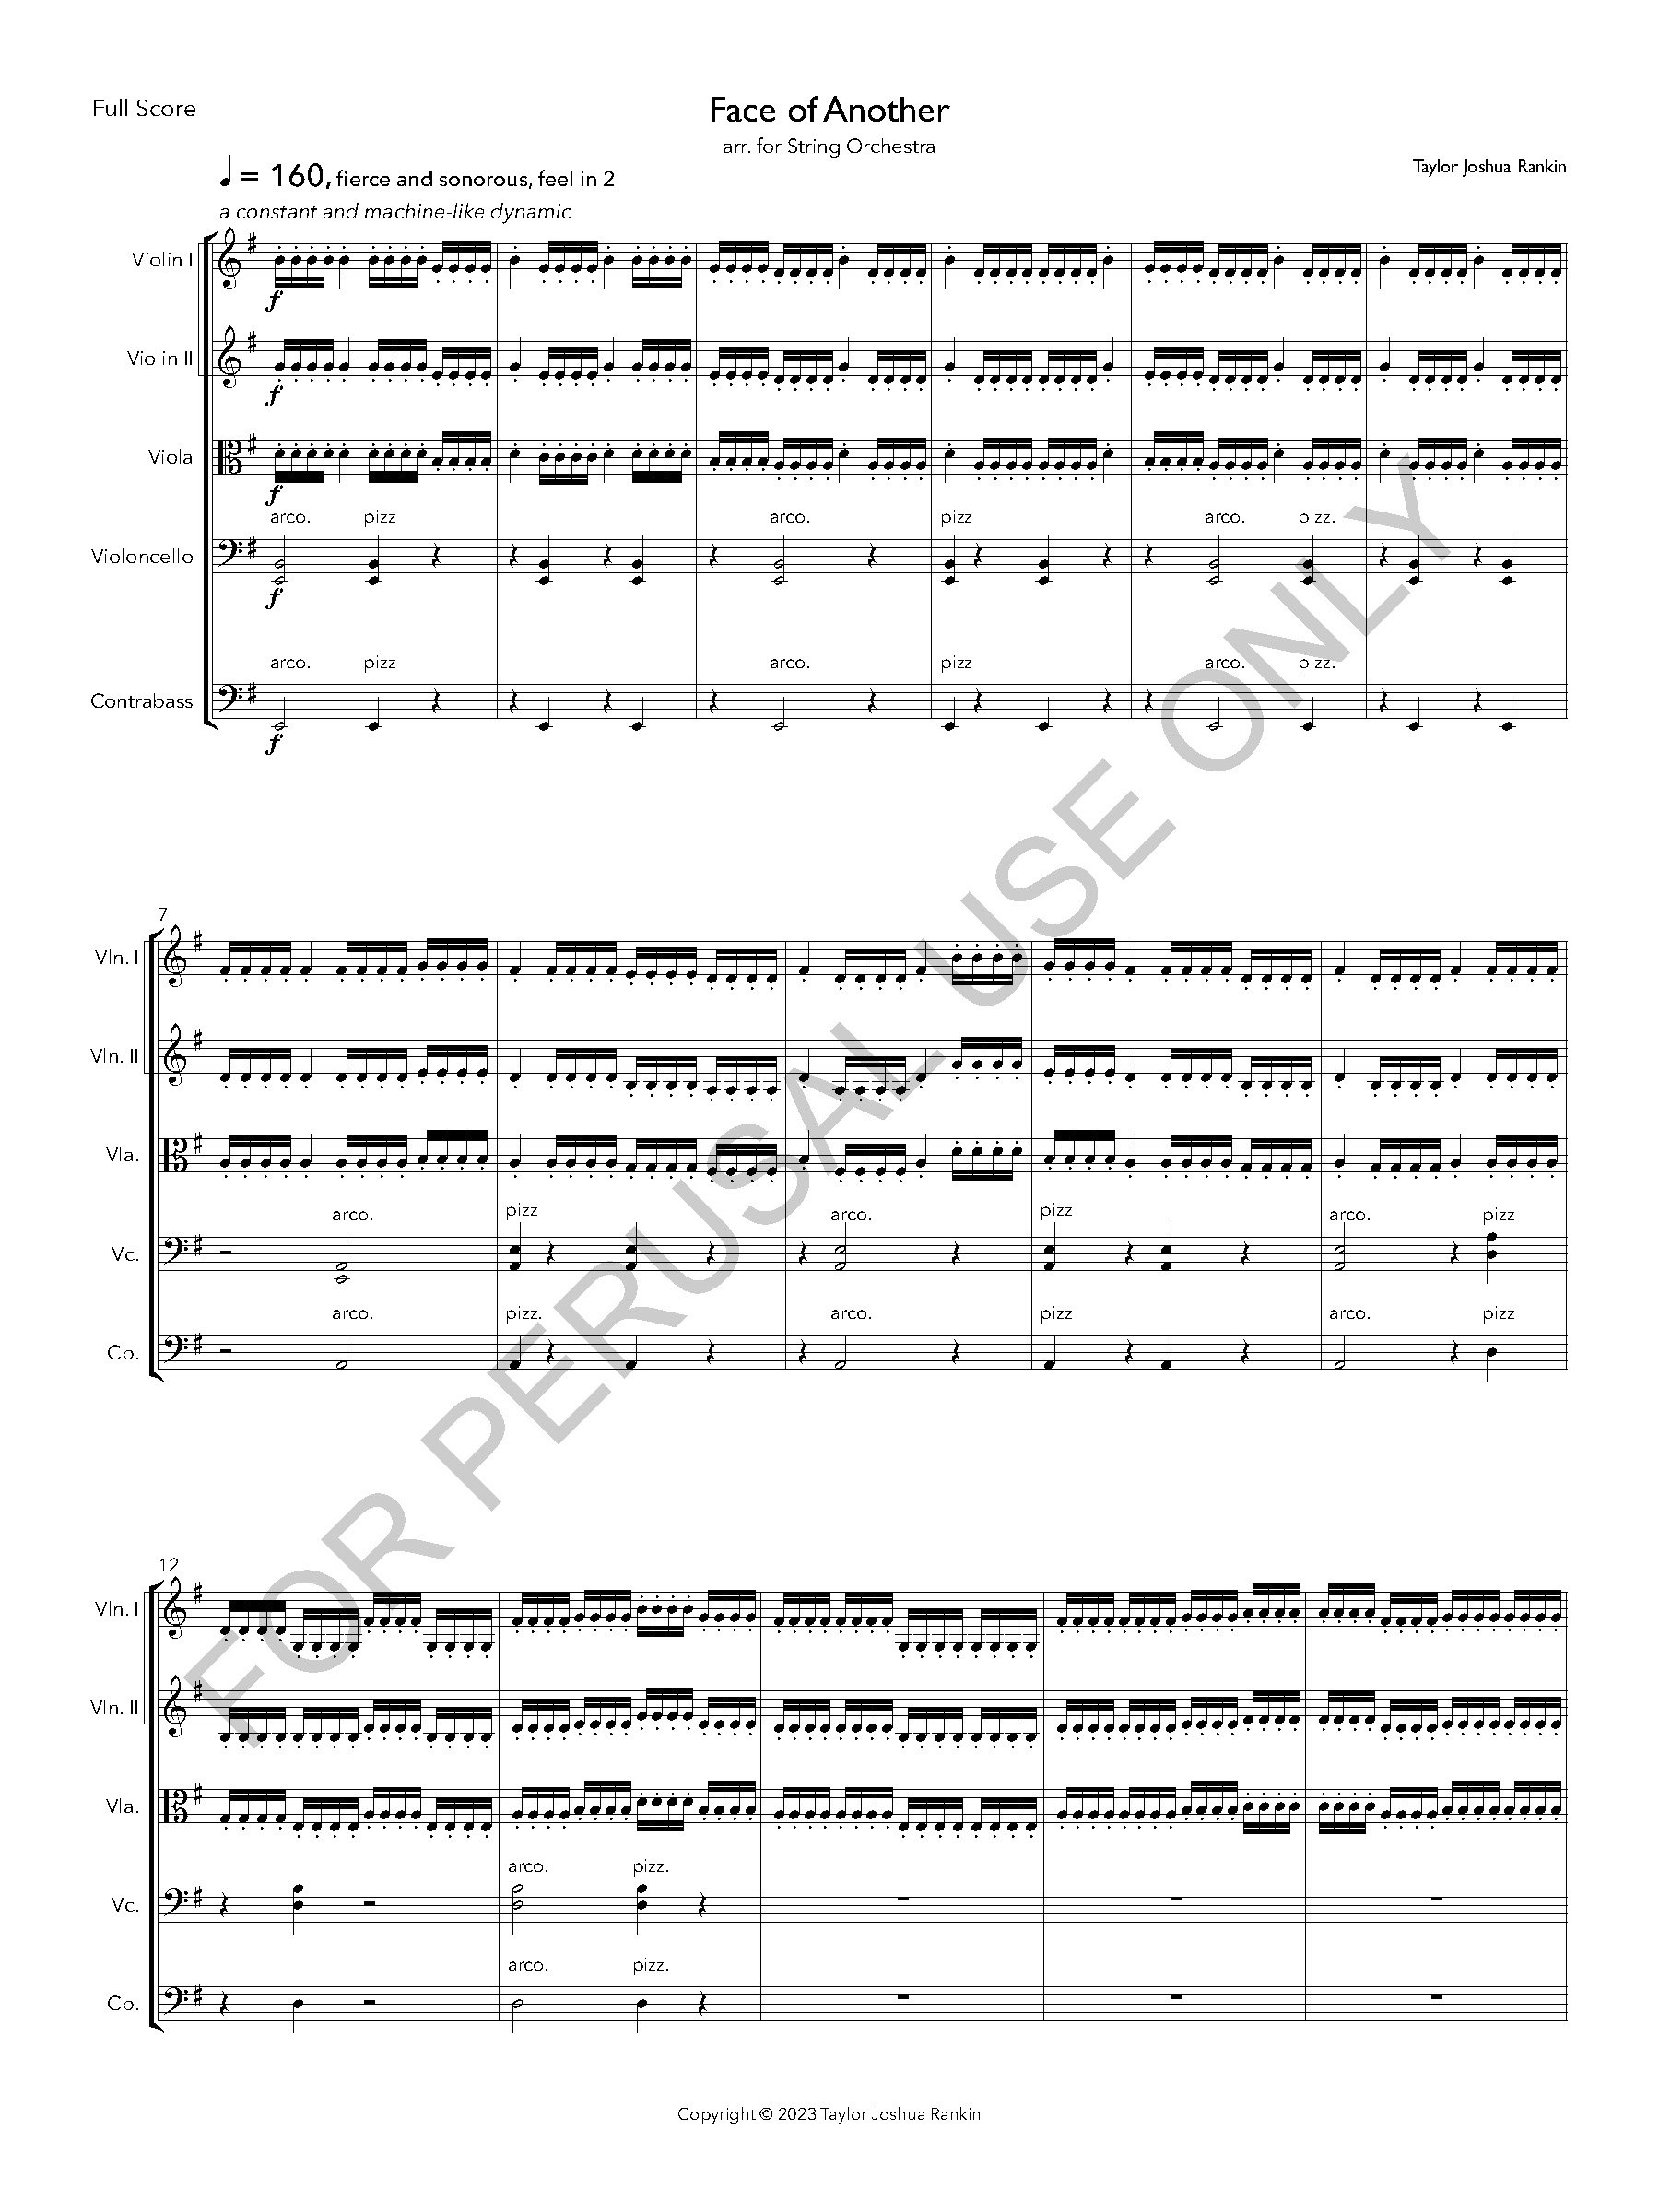 Face of Another - arr. for string orchestra - Full Score_Page_02.jpg